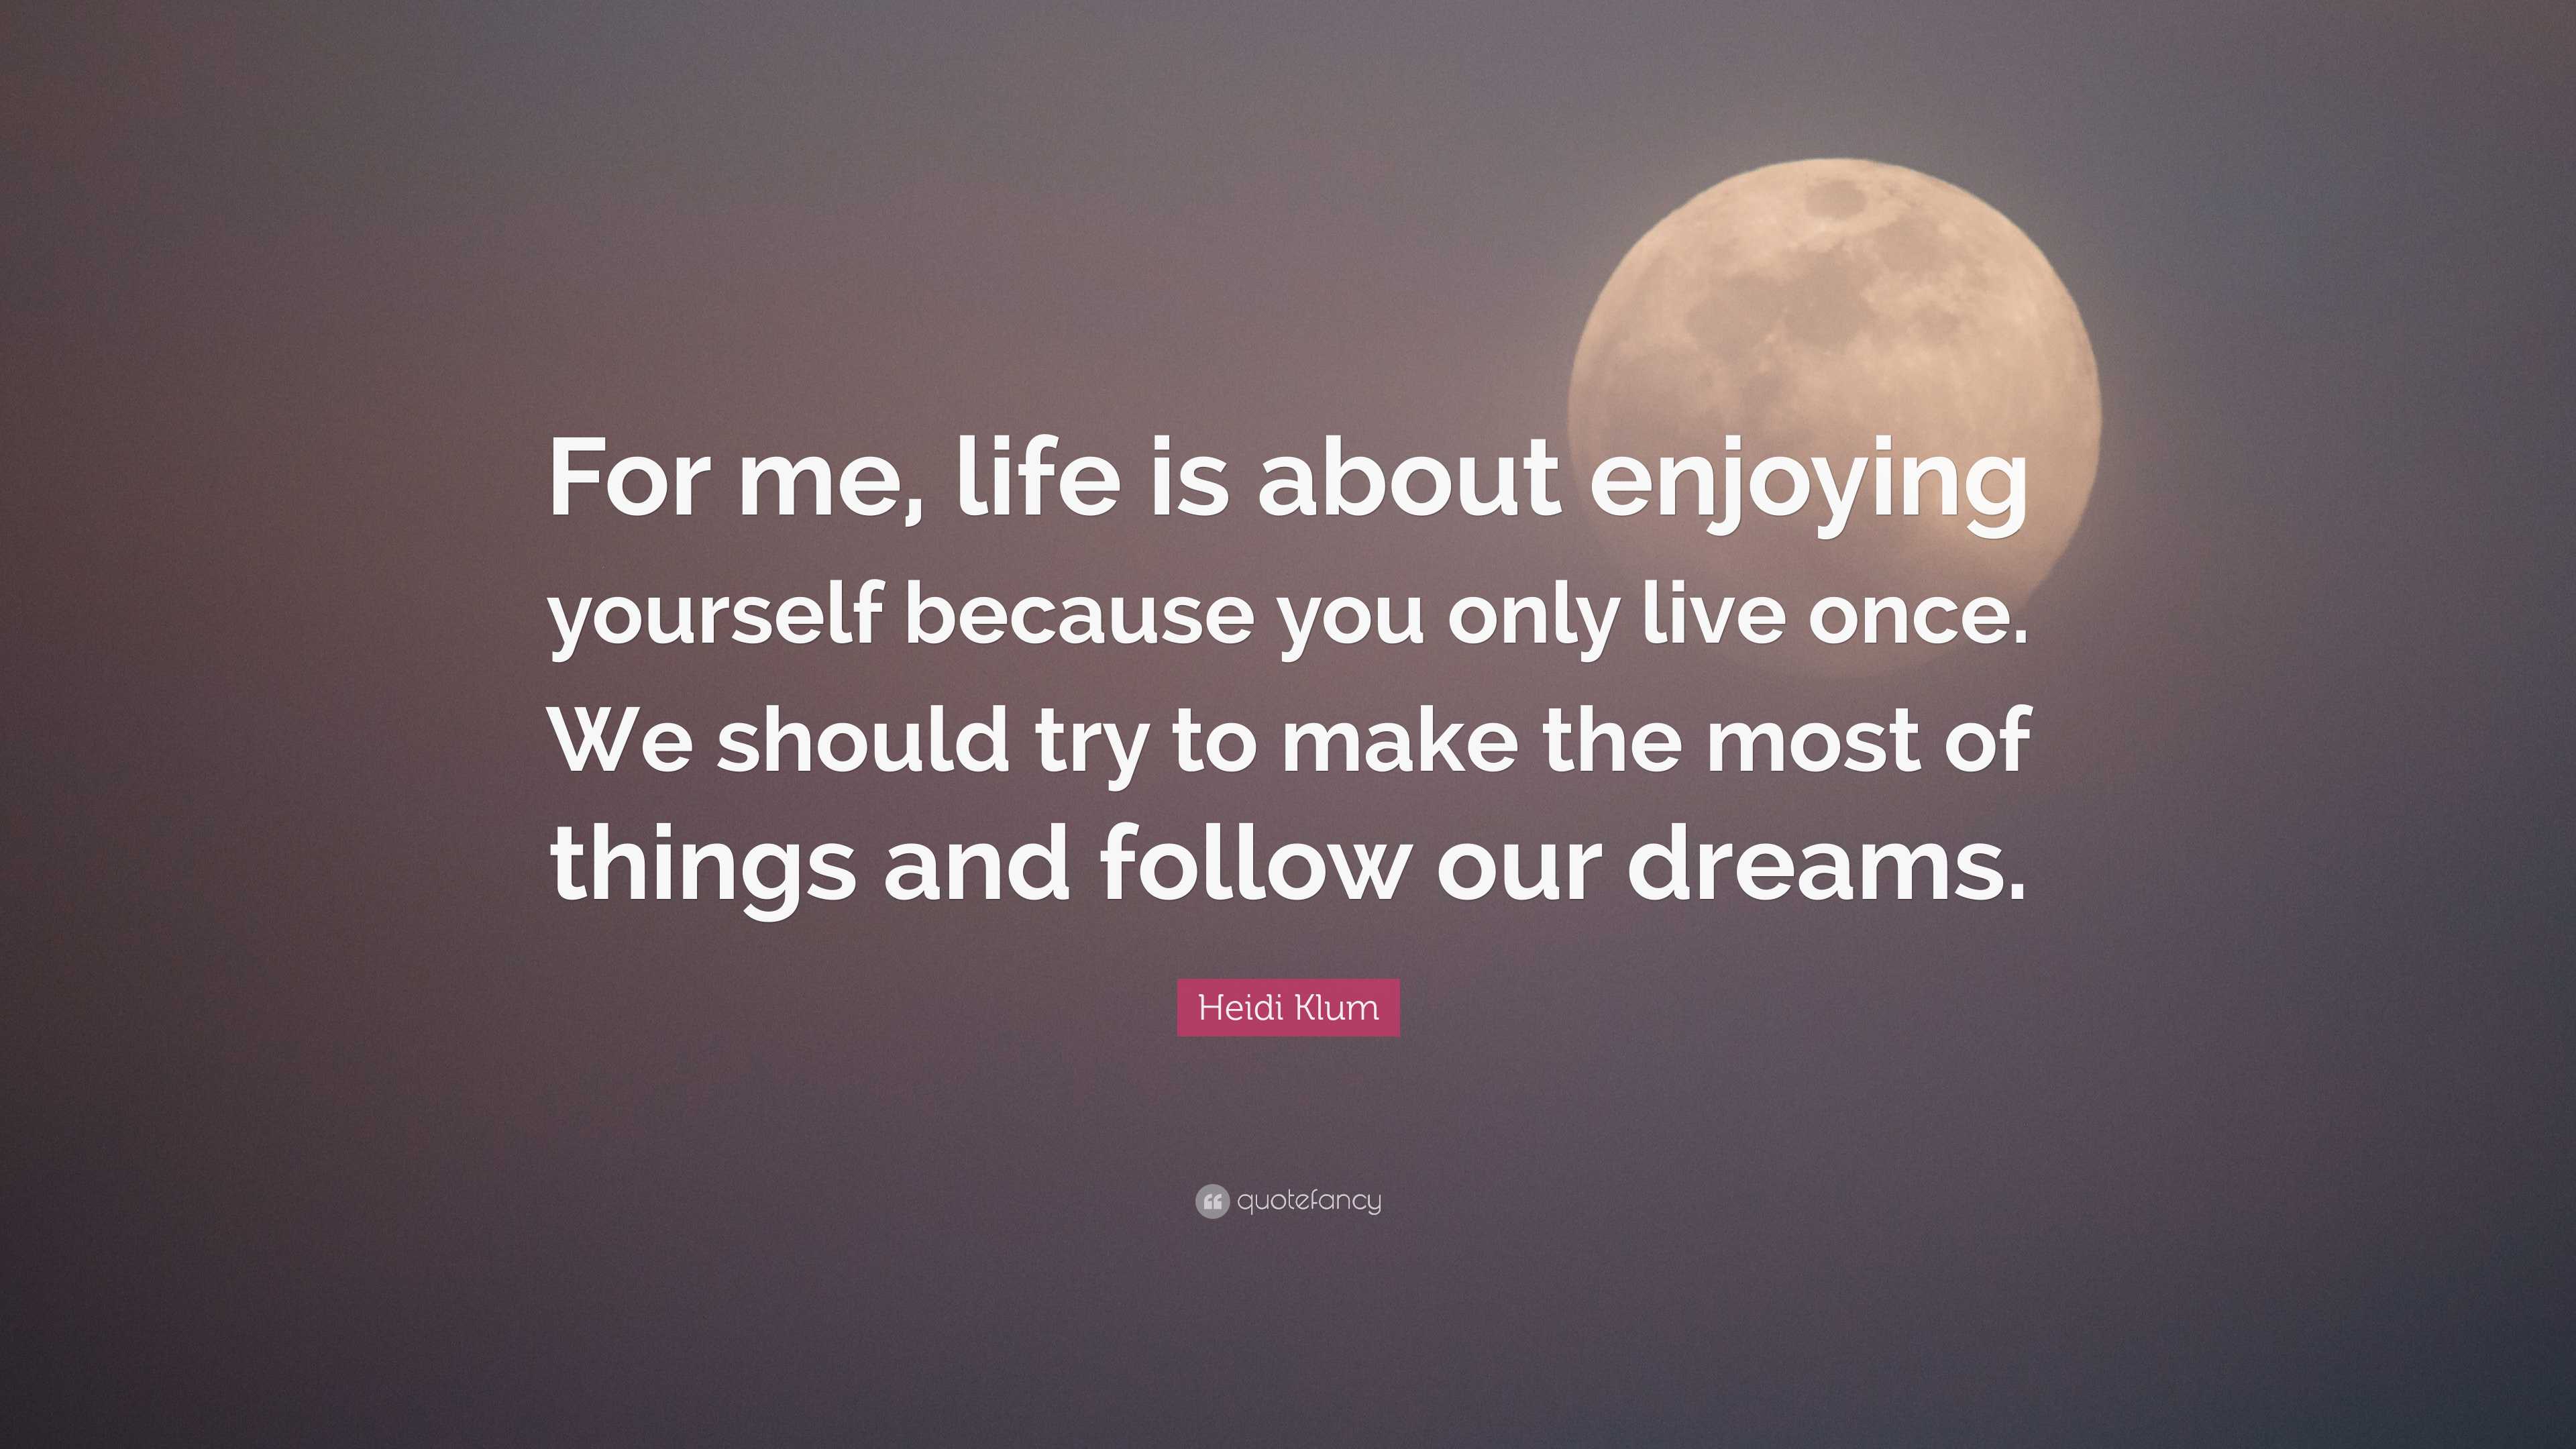 Heidi Klum Quote: “For me, life is about enjoying yourself because